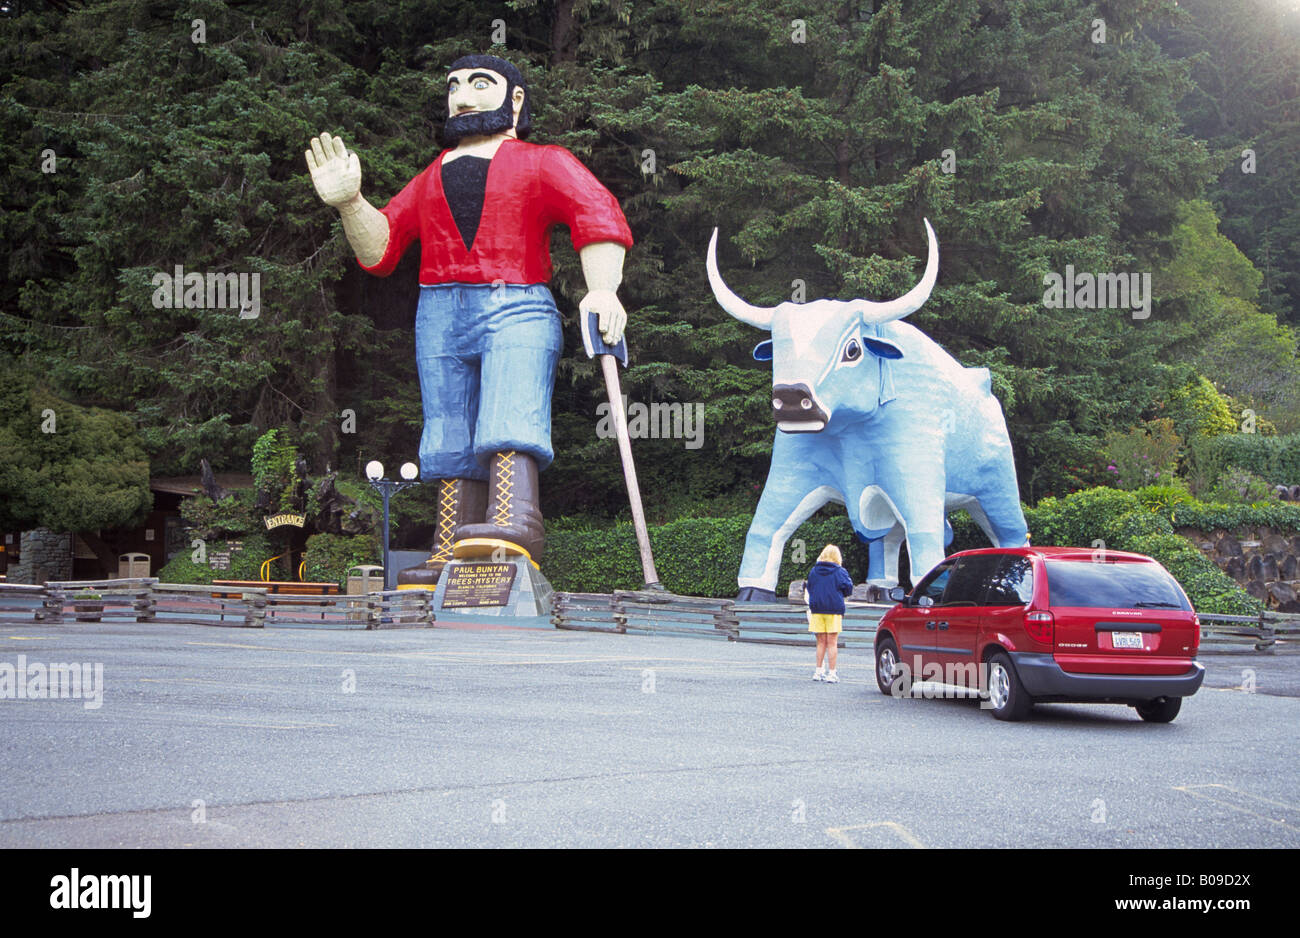 A statue of Paul Bunyan and Babe the Blue Ox at the Trees of Mystery near Redwoods National Park in northern California Stock Photo